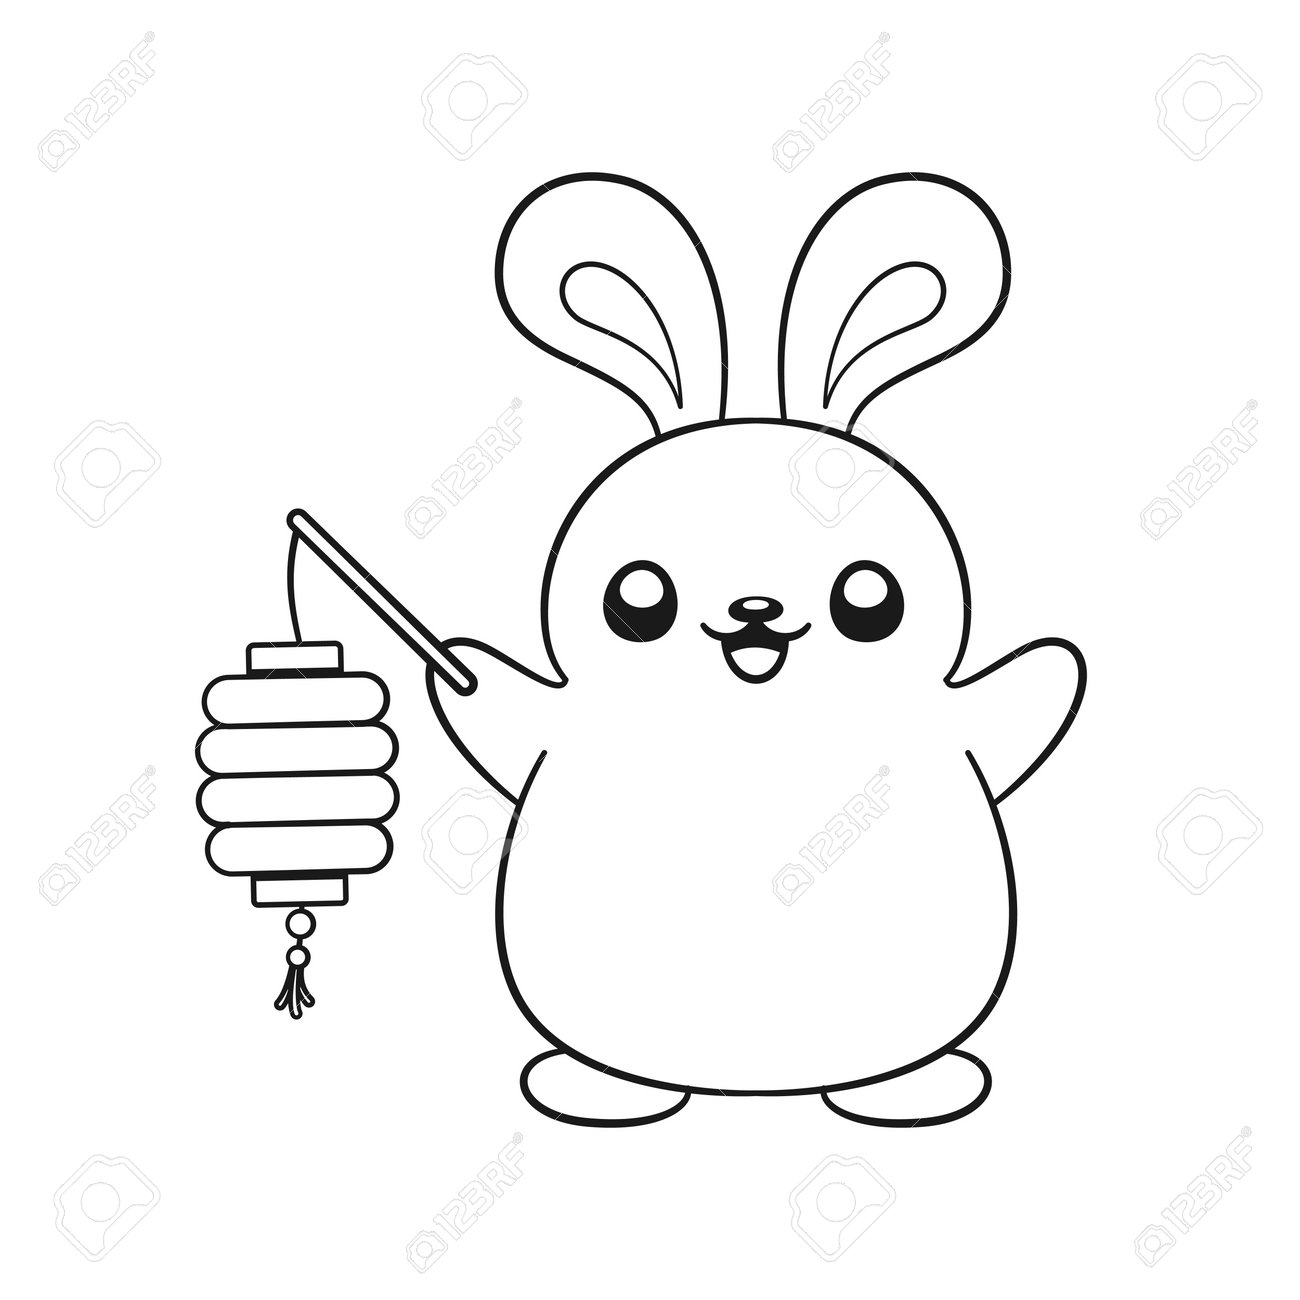 Cute rabbit holding a chinese lantern outline cartoon illustration chinese zodiac animal year of the rabbit new year and mid autumn moon festival coloring book page worksheet for kids royalty free